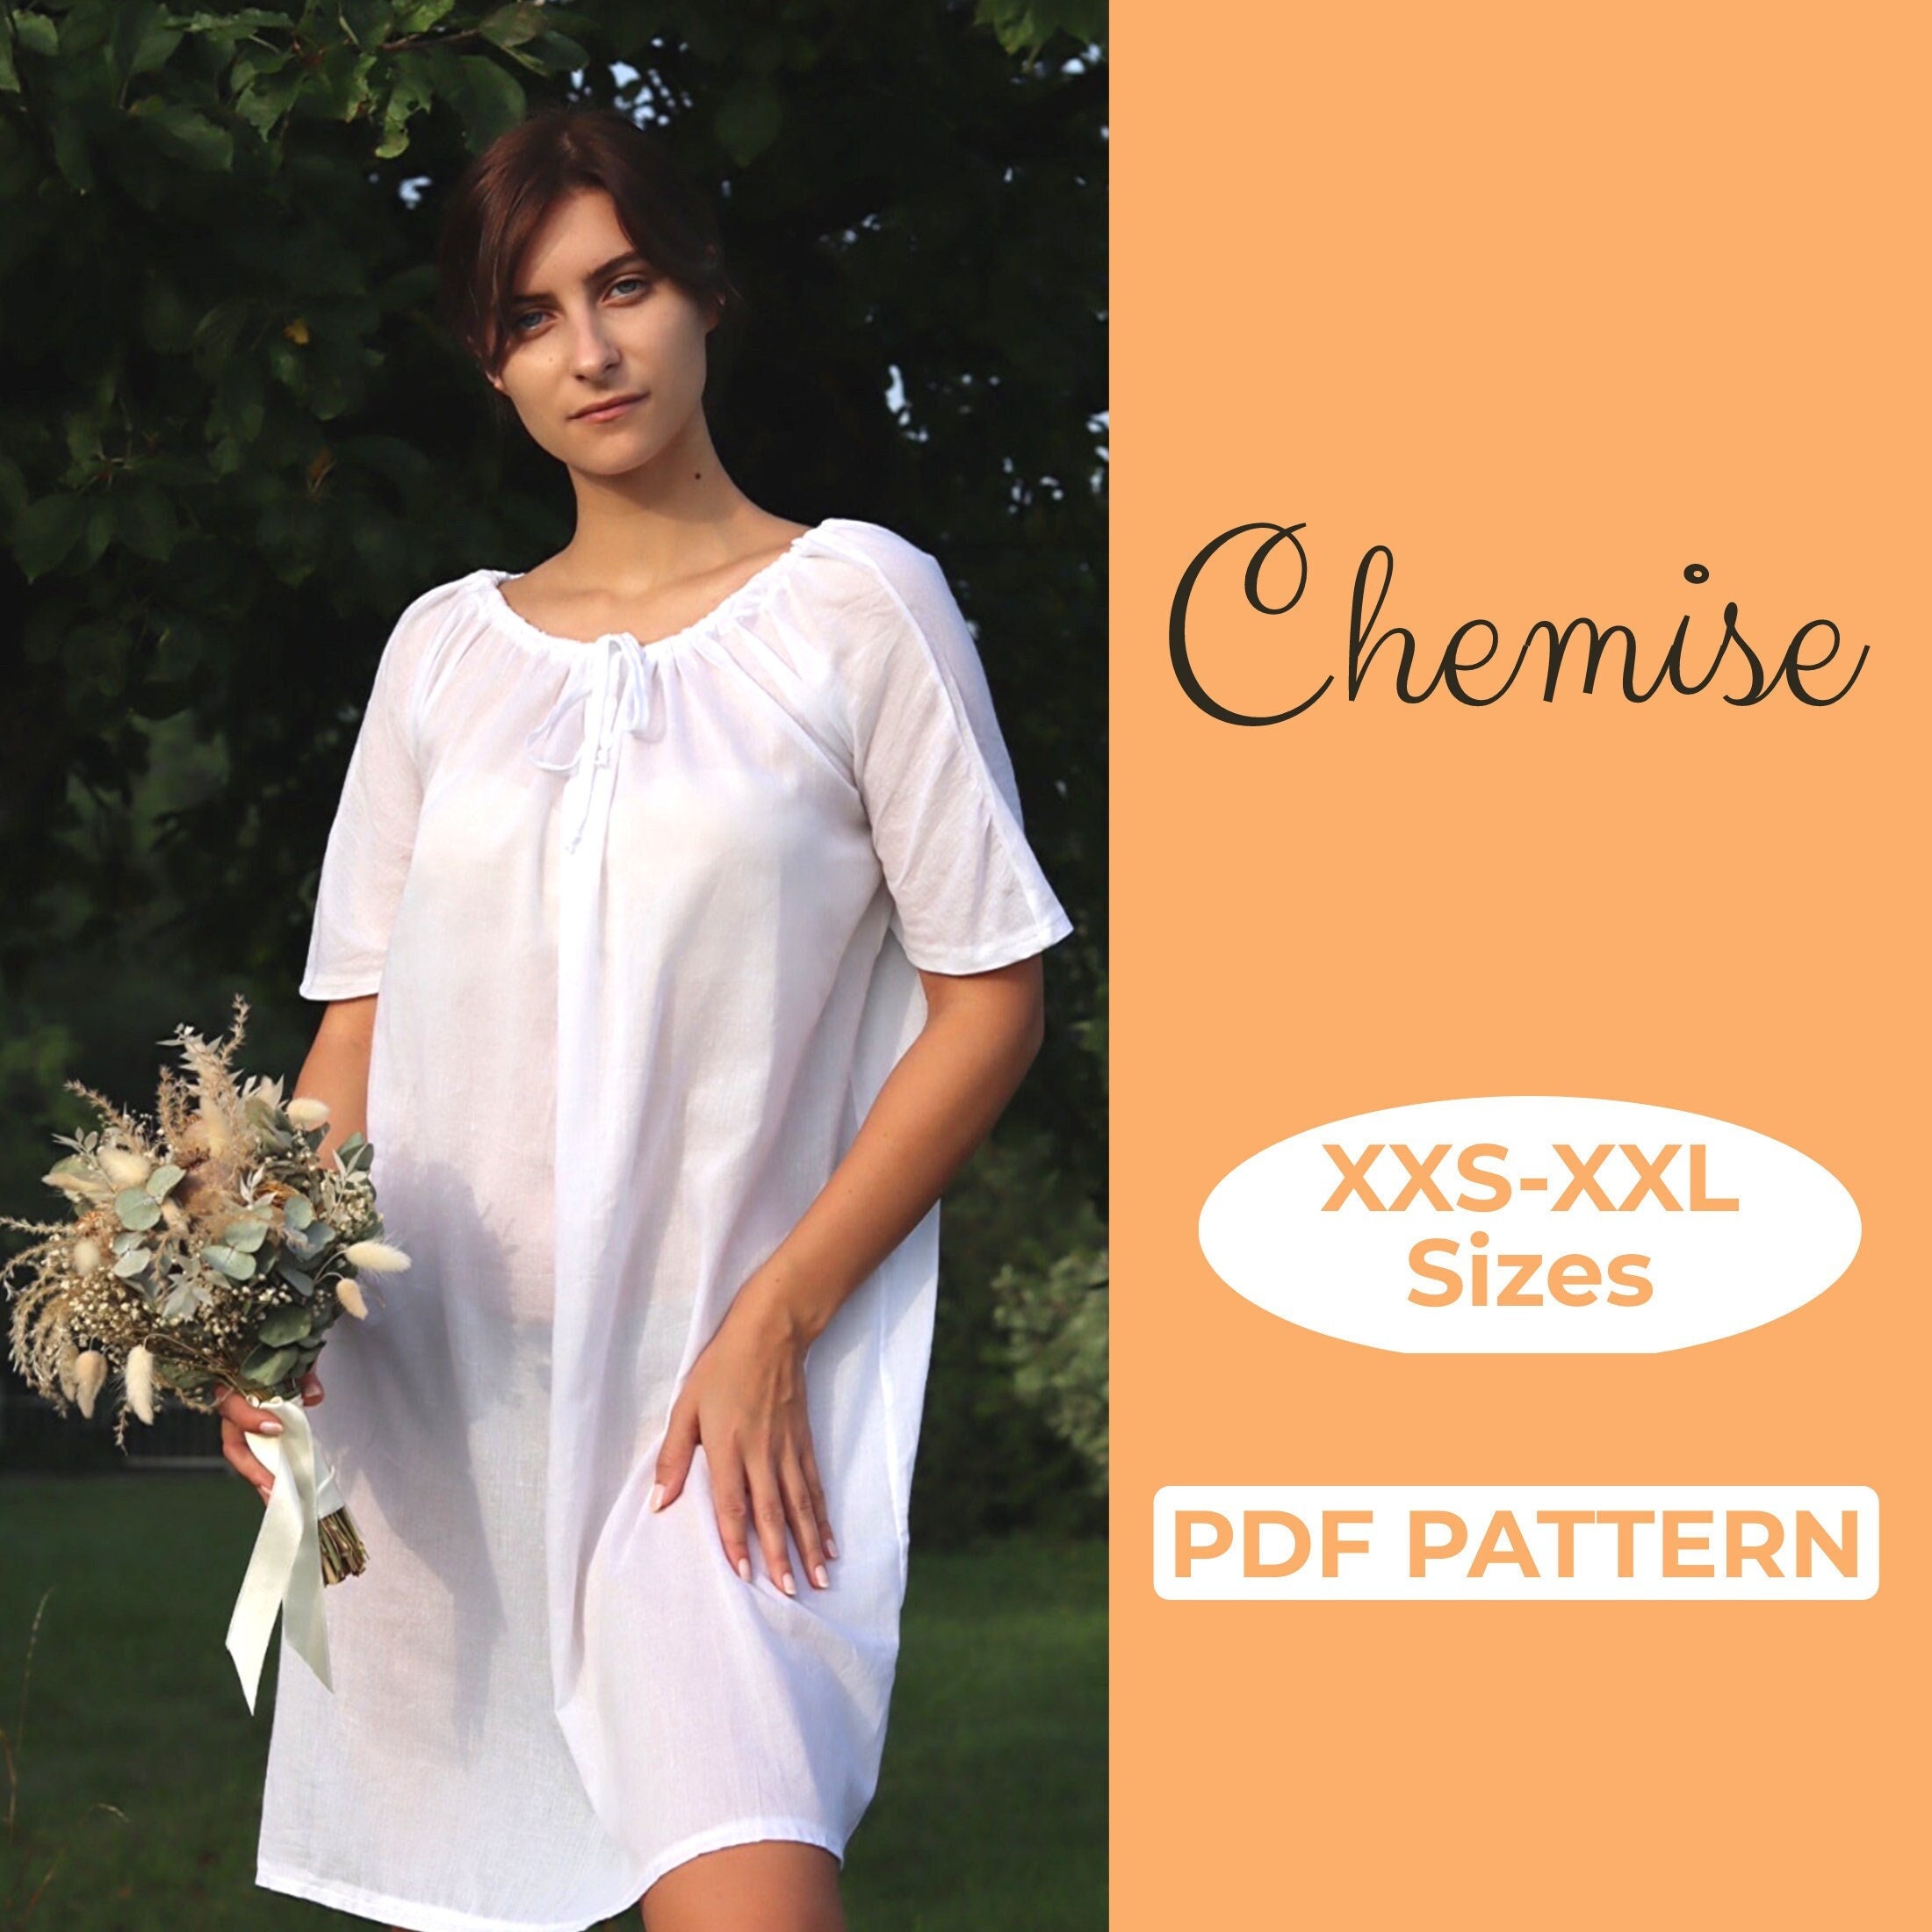 Fitted Renaissance Chemise With Basic Sleeves and a Drawstring